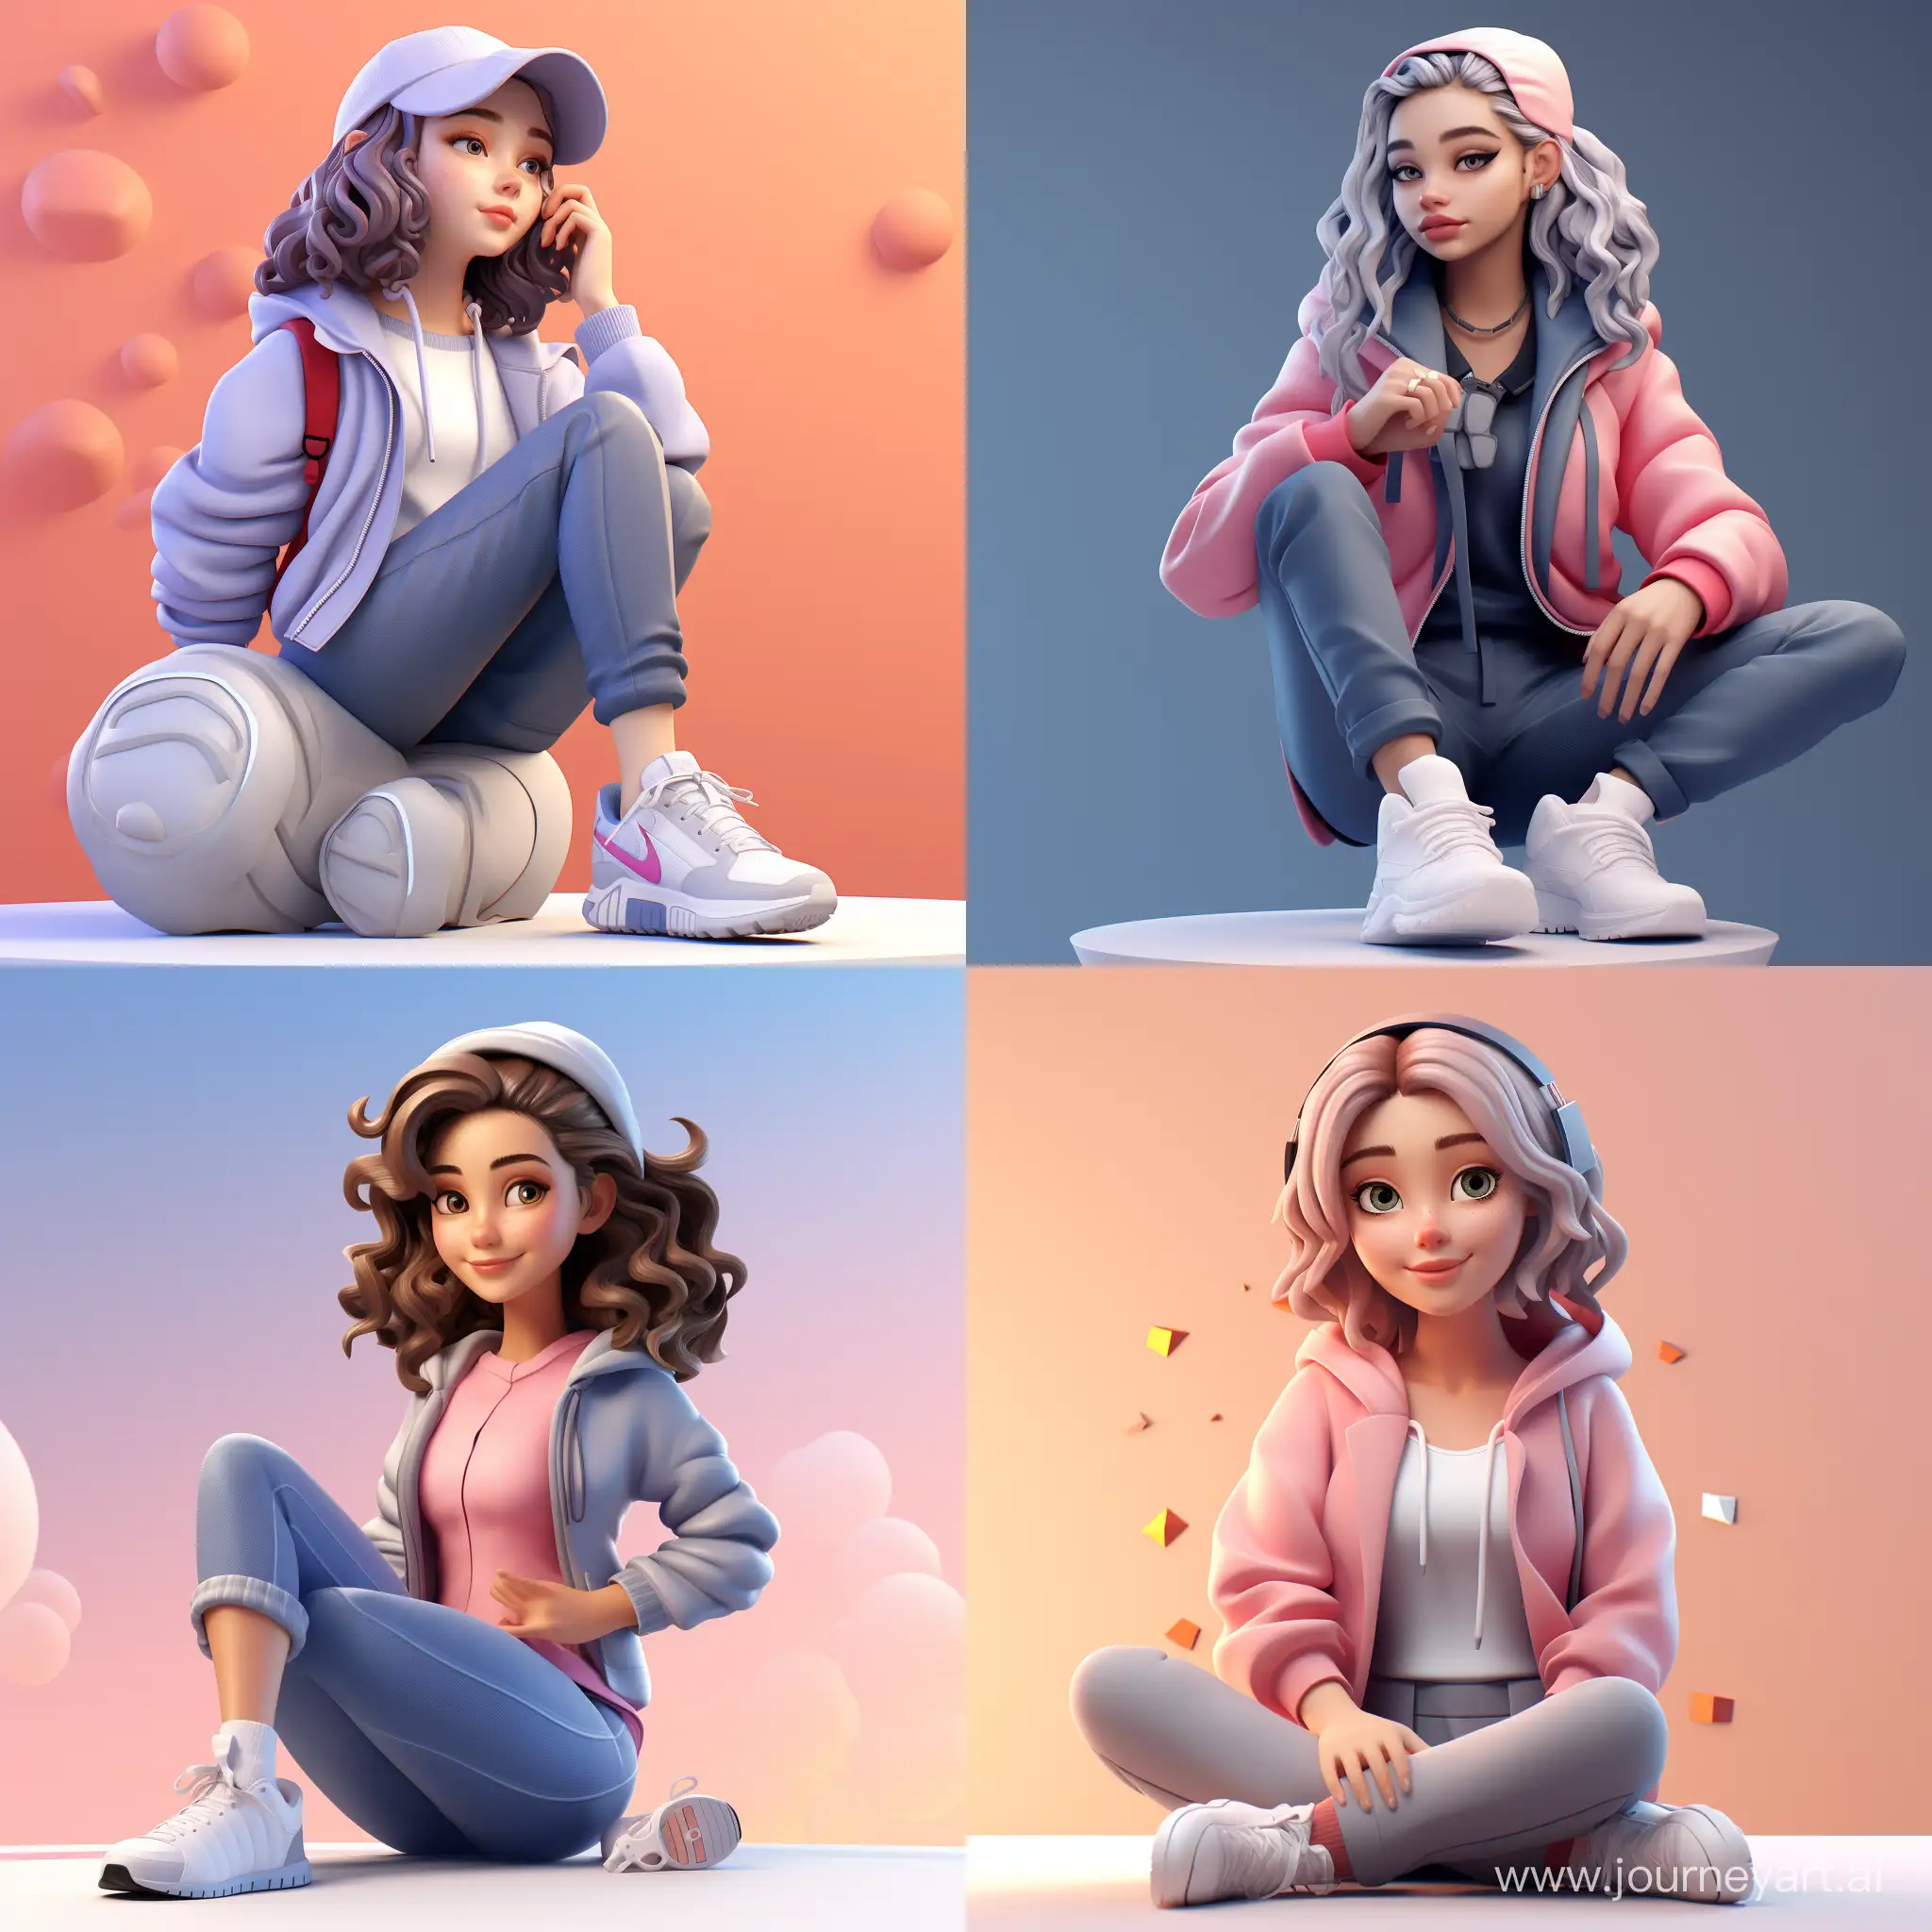 create a 3D illustration of an girl animated character sitting casually. The character must wear casual modern clothing such as jeans jacket and sneakers shoes. The background of the image is a white and a profile picture that match.